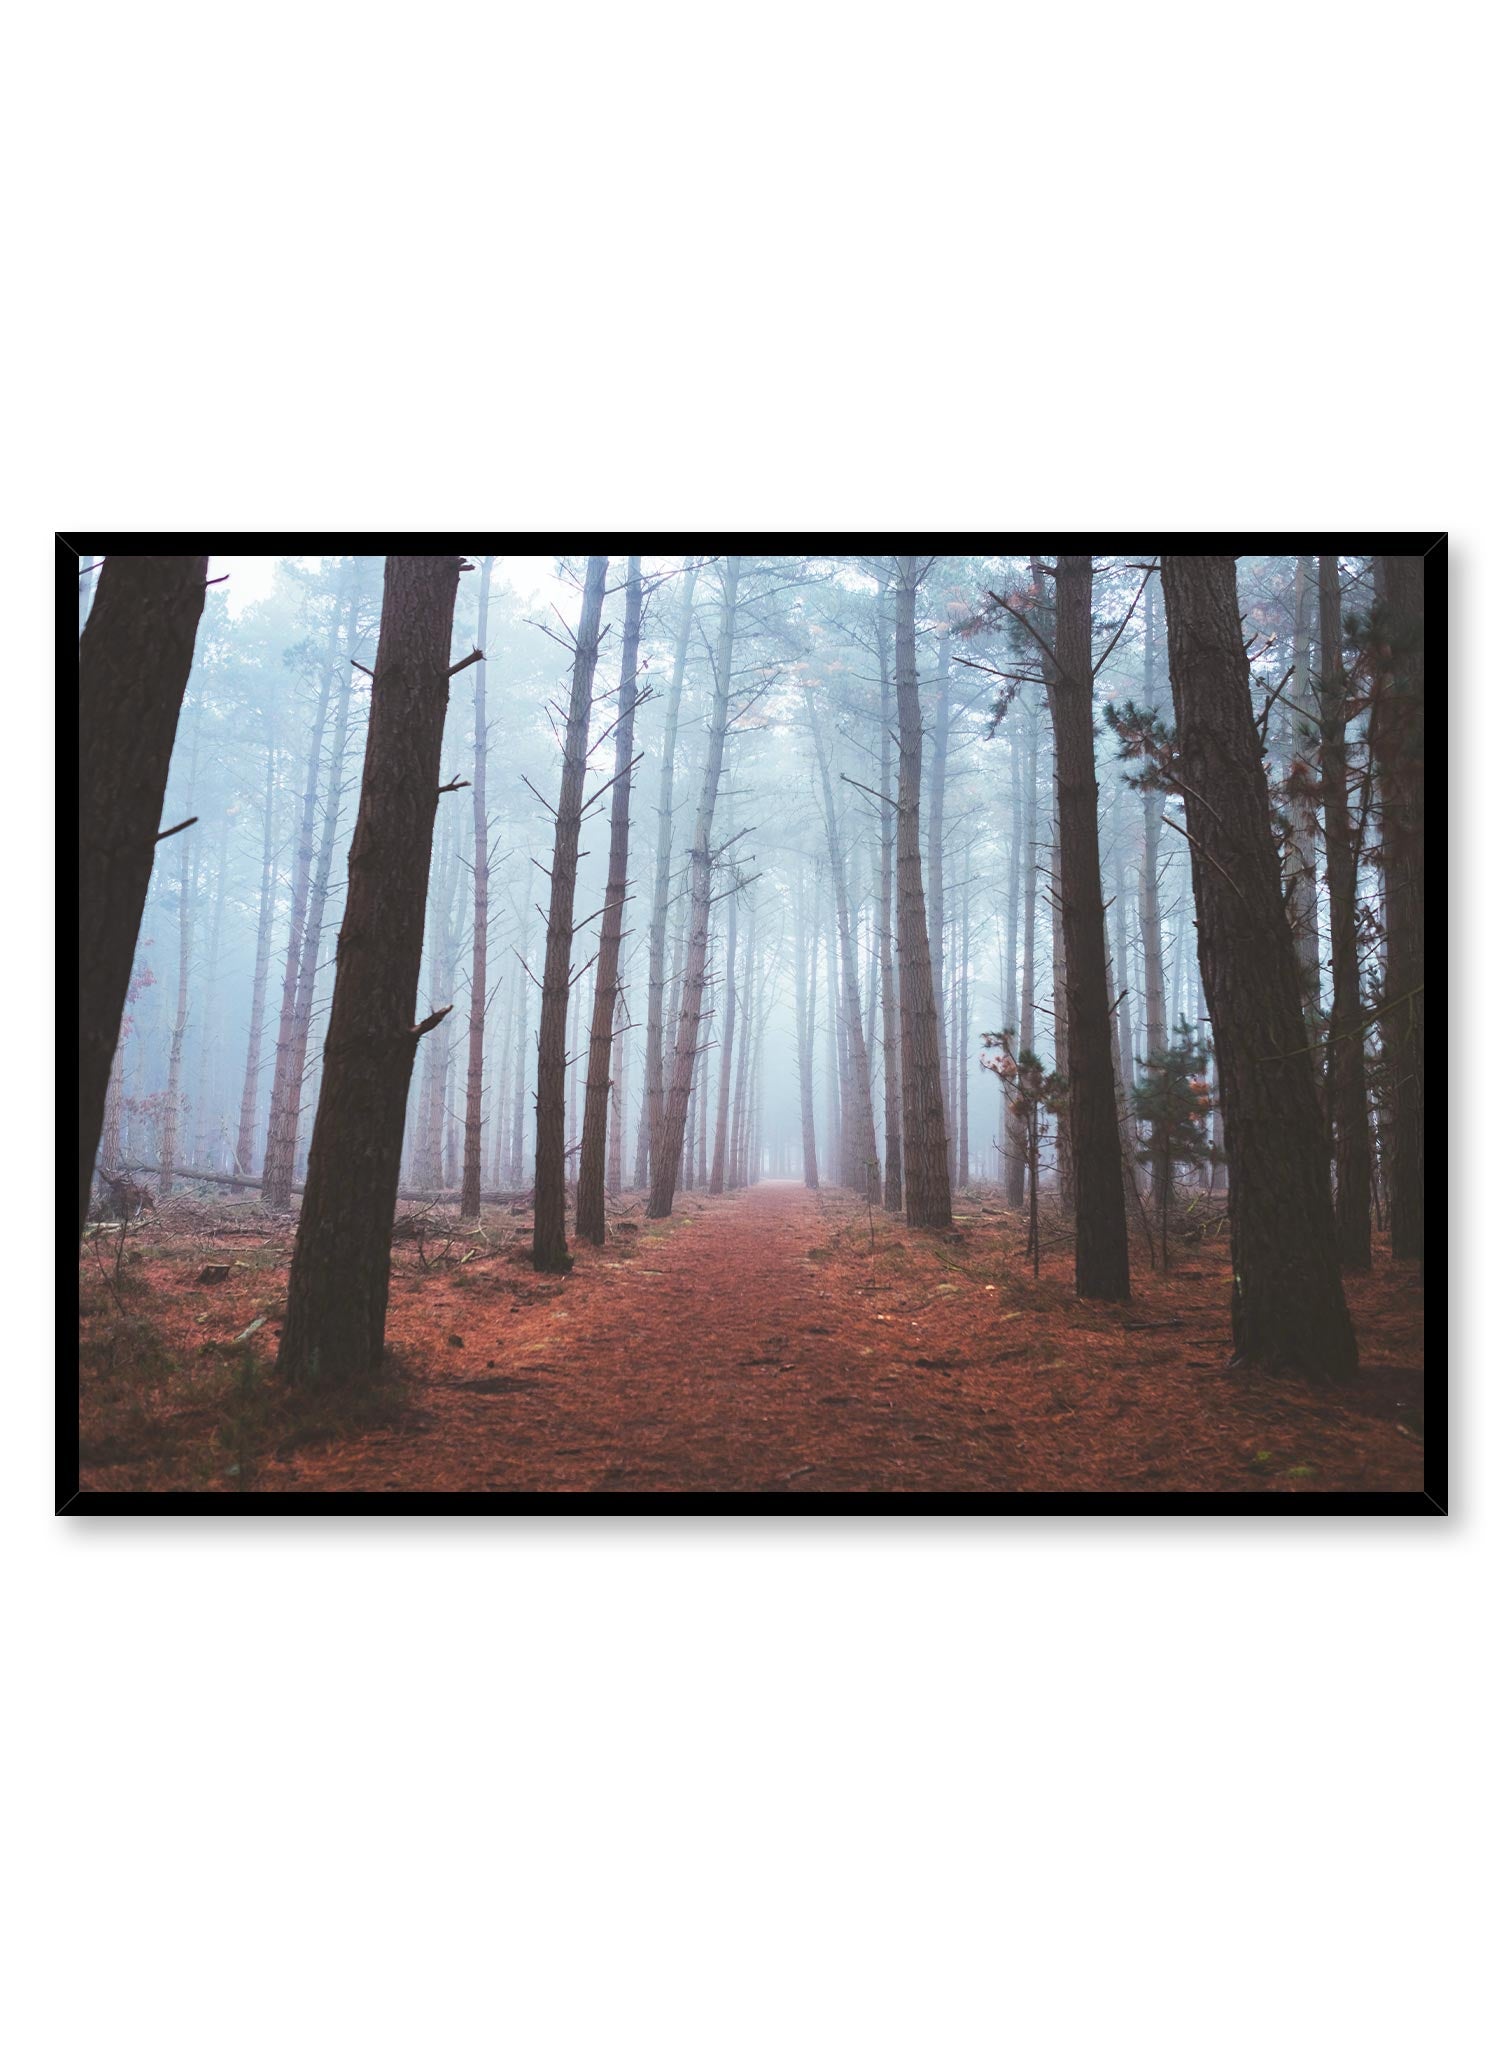 Gloom is a minimalist photography by Opposite Wall of a red-brown path leading into a foggy forest with tall trees.